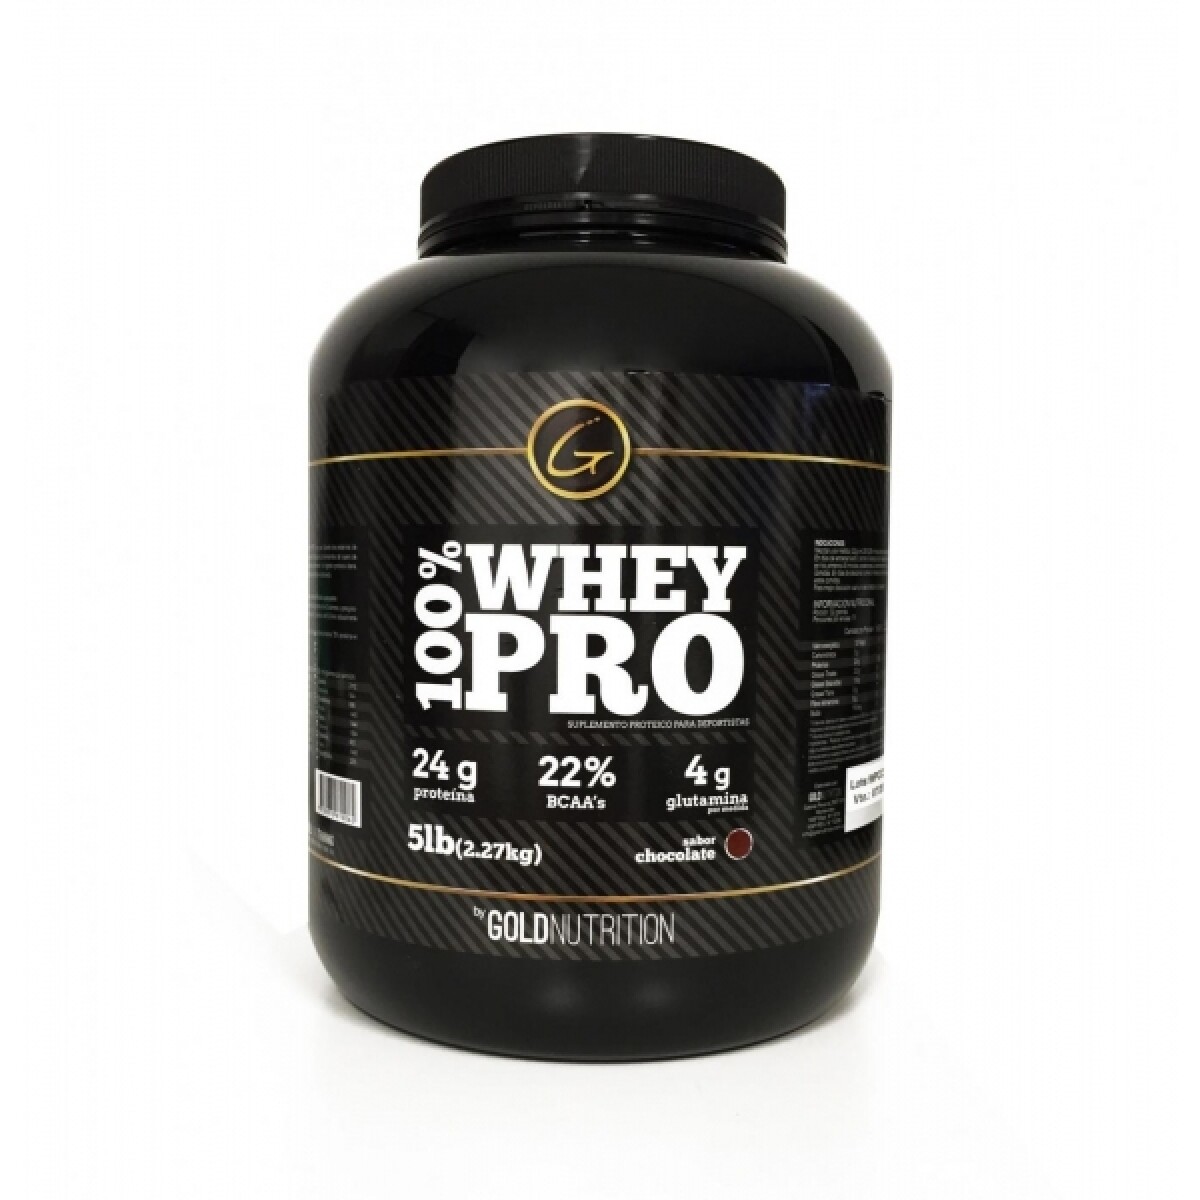 Proteína 100% Whey Pro 5 Gold Nutrition Chocolate 5 Lbs. 